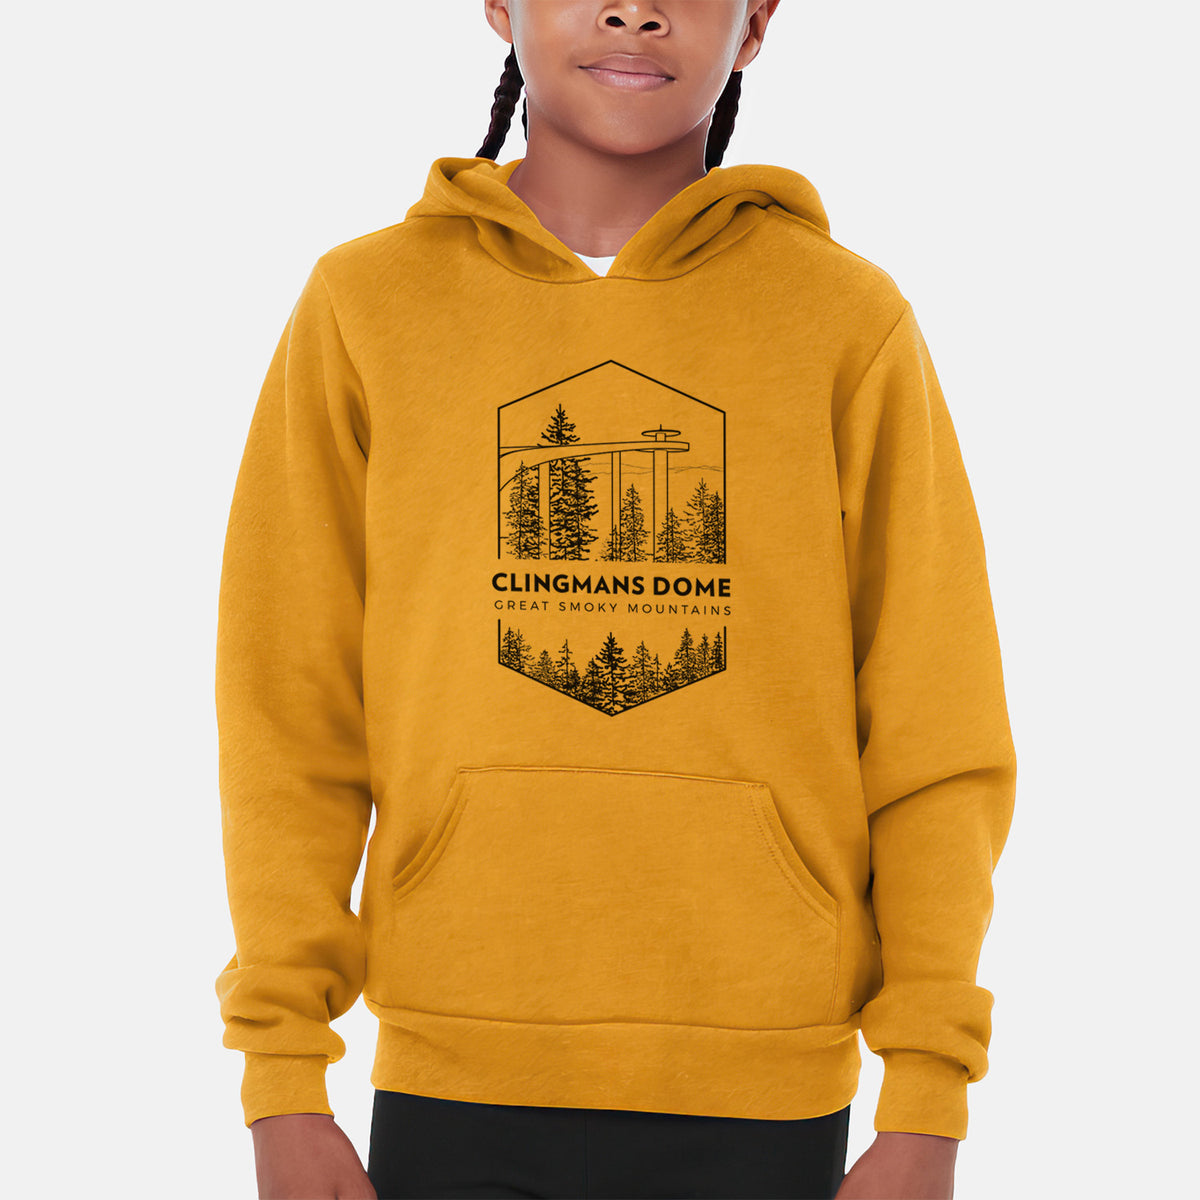 Clingmans Dome - Great Smoky Mountains National Park - Youth Hoodie Sweatshirt